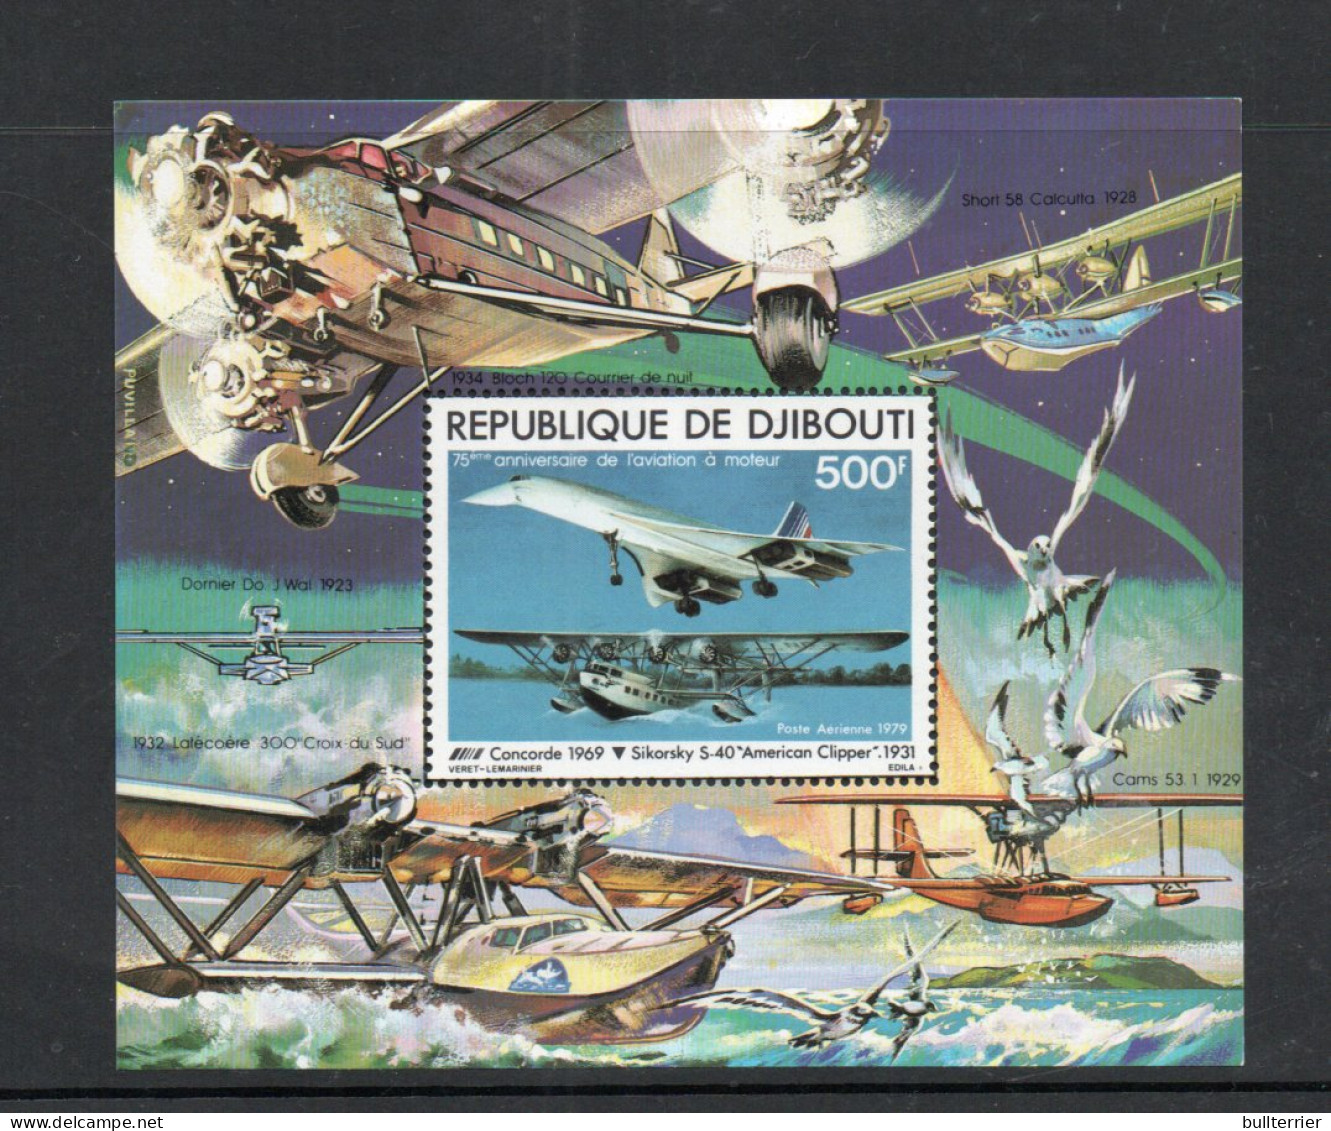 CONCORDE - DJIBOUTI -  1979 - CONCORDE LIMITED ISSUE PERFORATE SOUVENIR SHEET  MINT NEVER HINGED - Concorde